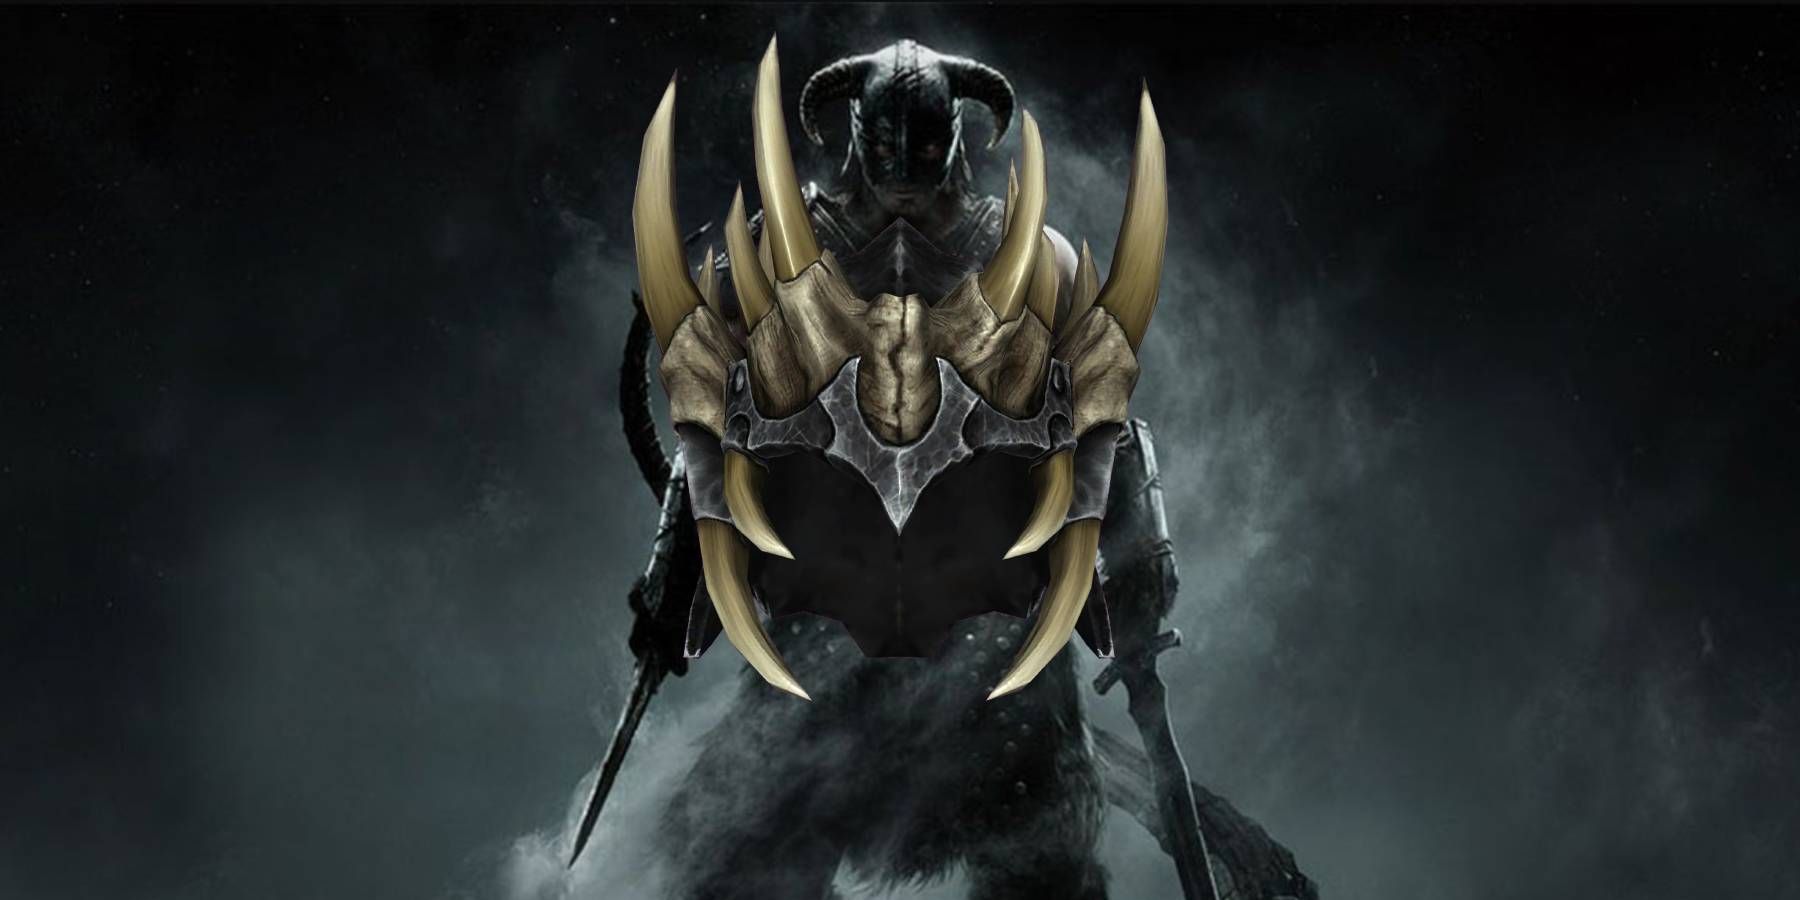 The Dragonborn from Skyrim with the Jagged Crown